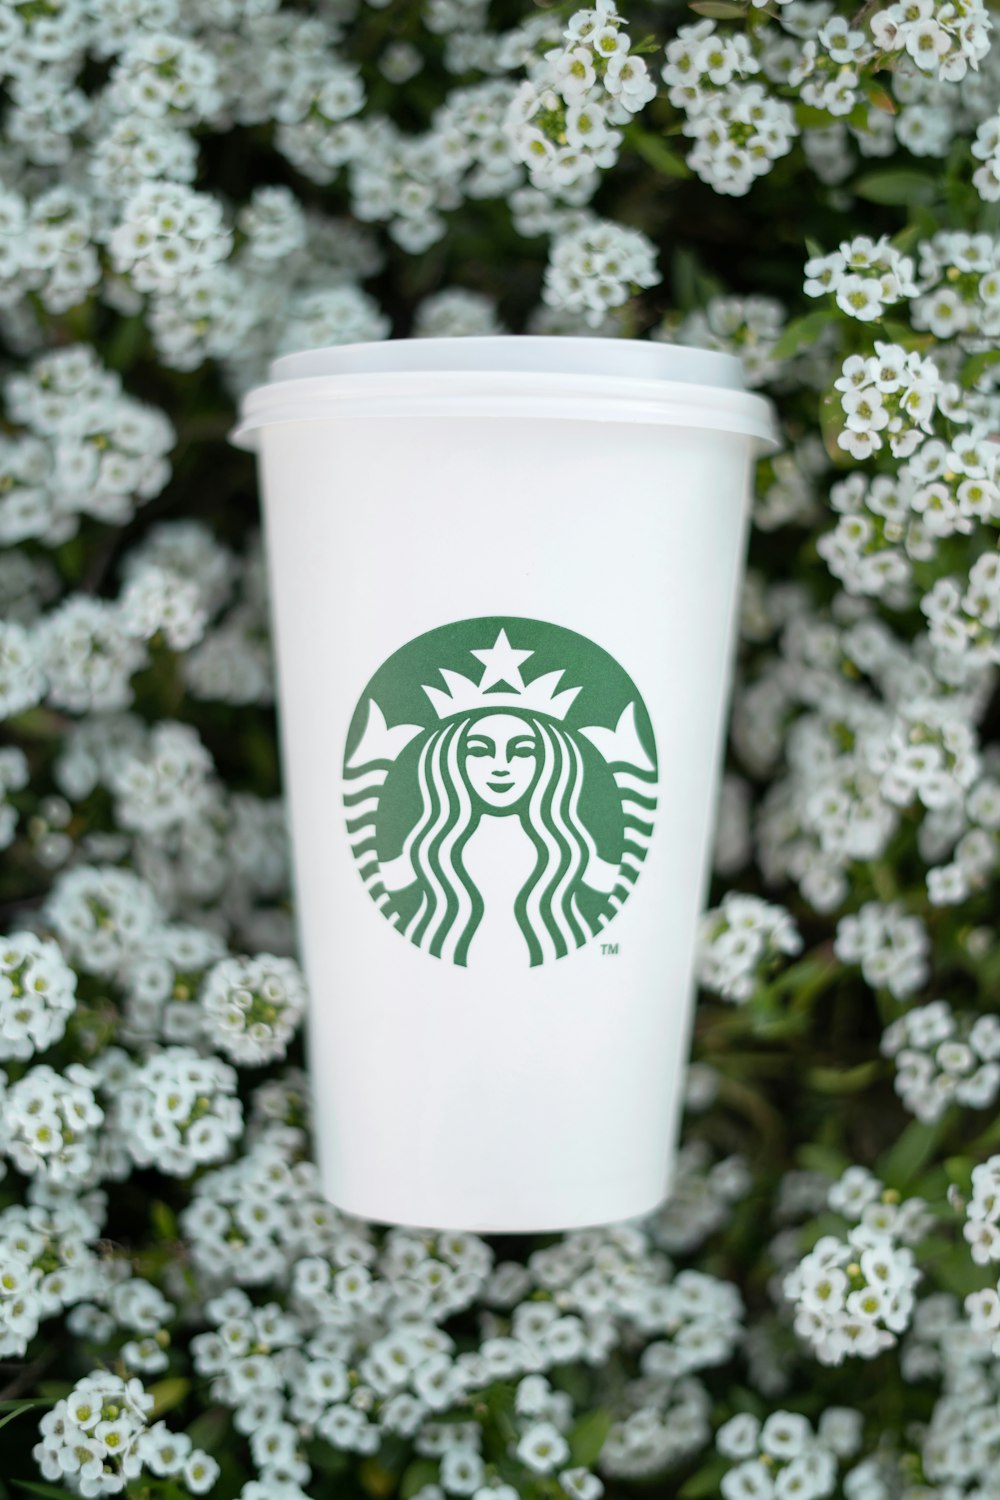 a white cup with a green design on it surrounded by white flowers